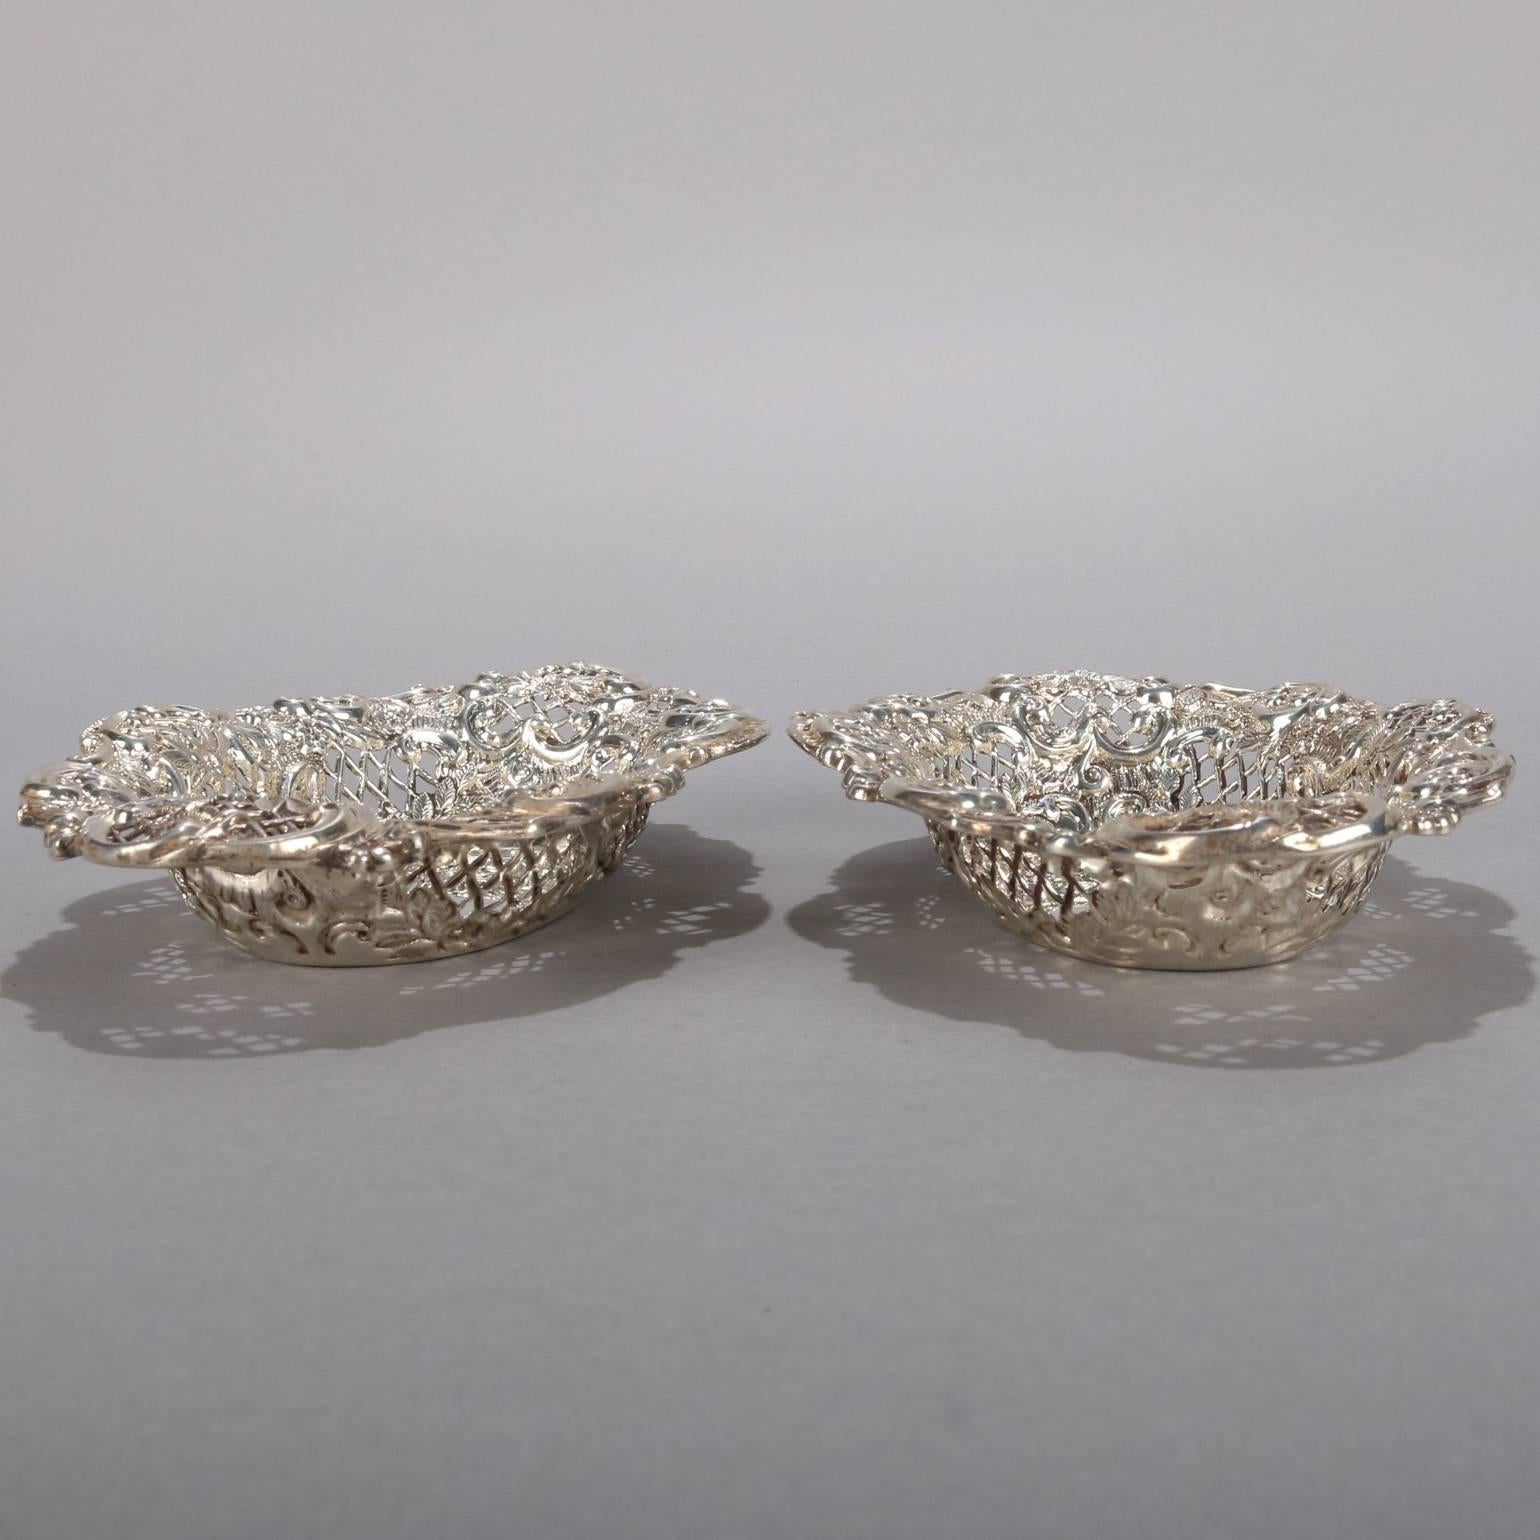 Pair of antique English repoussé sterling silver basket trays by Henry Matthews, en verso hallmarks, circa 1911.

Measure: 1.5